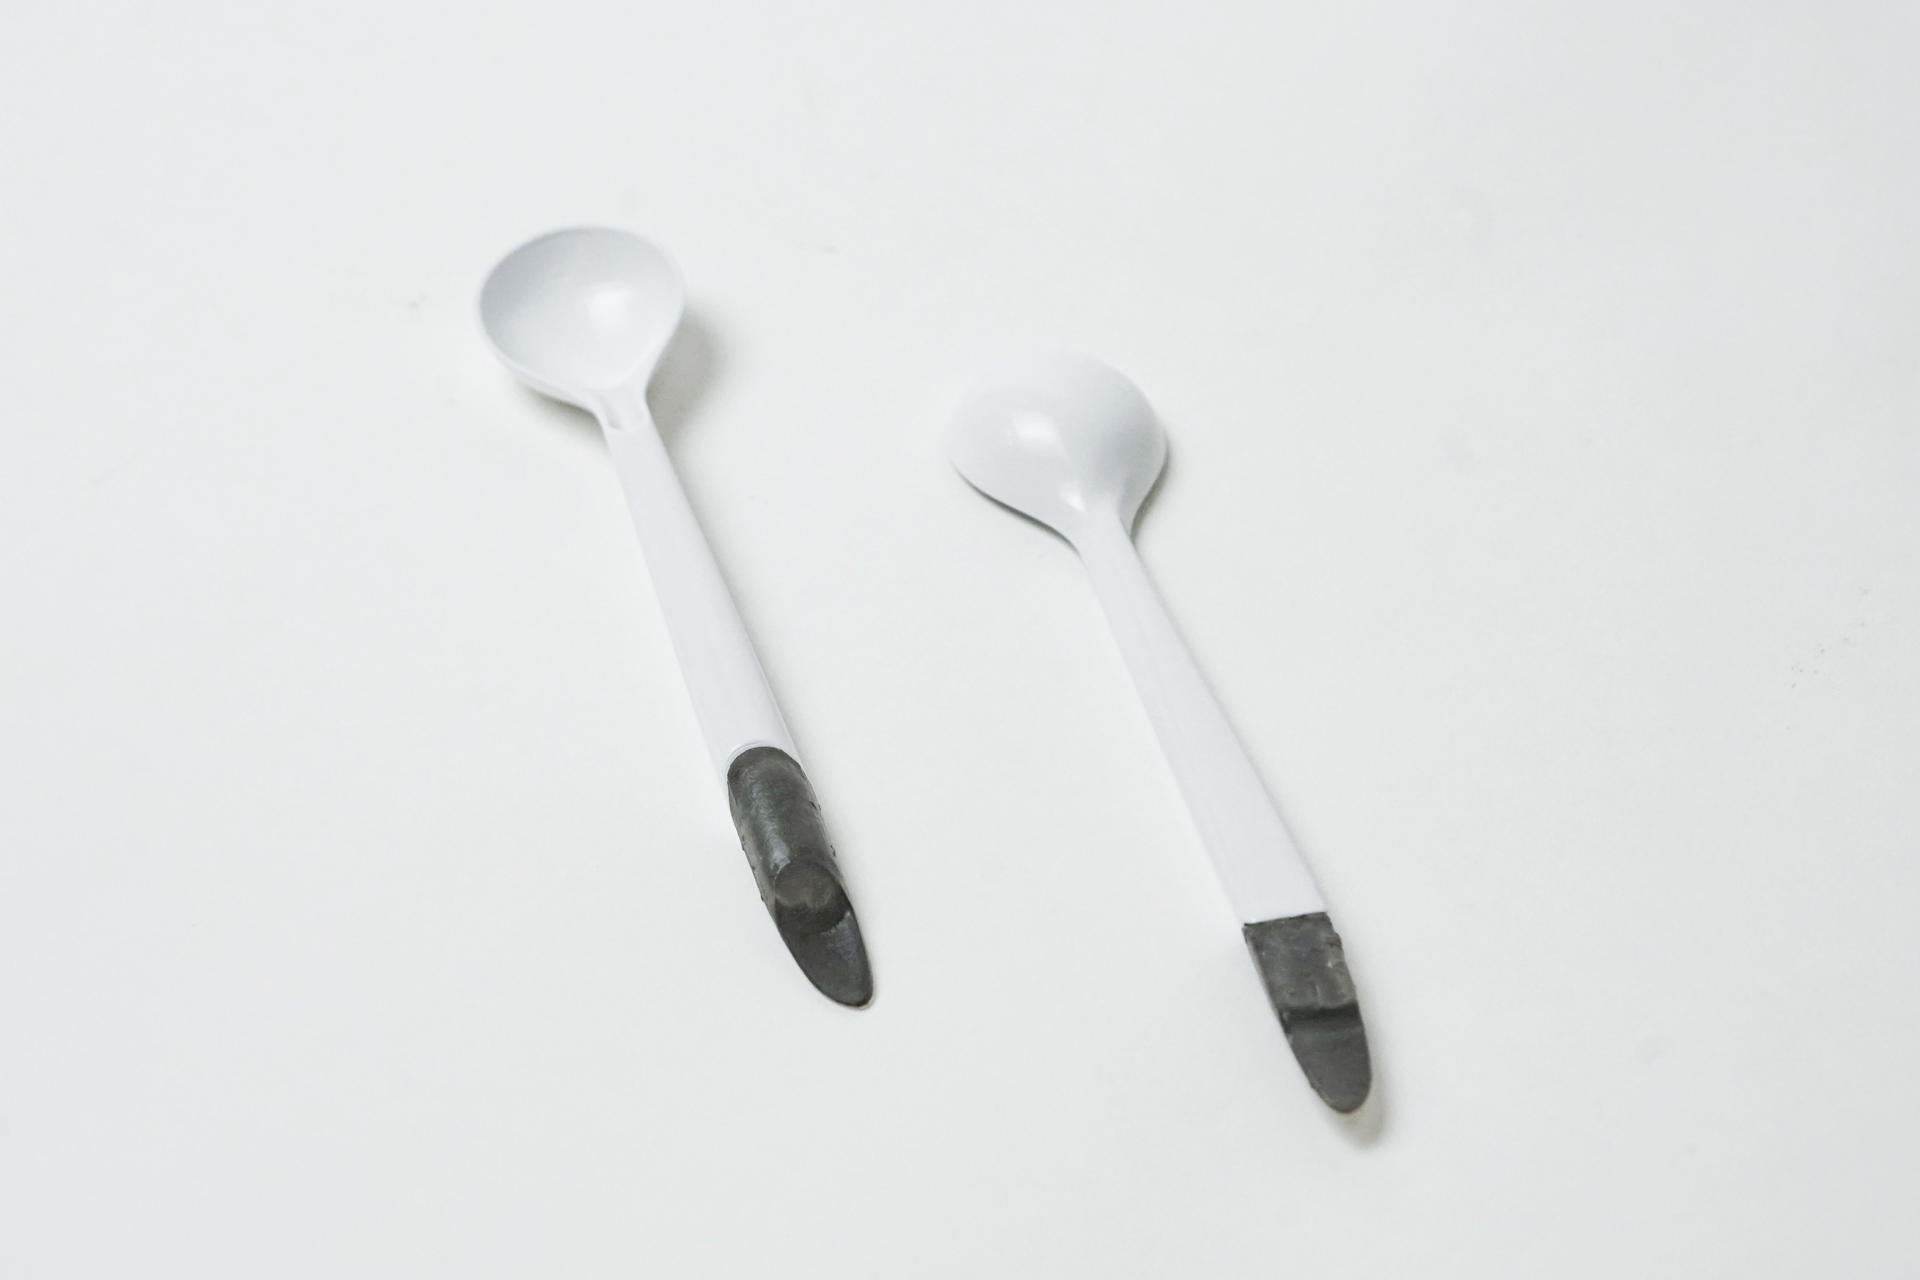 two white spoons with grey tails